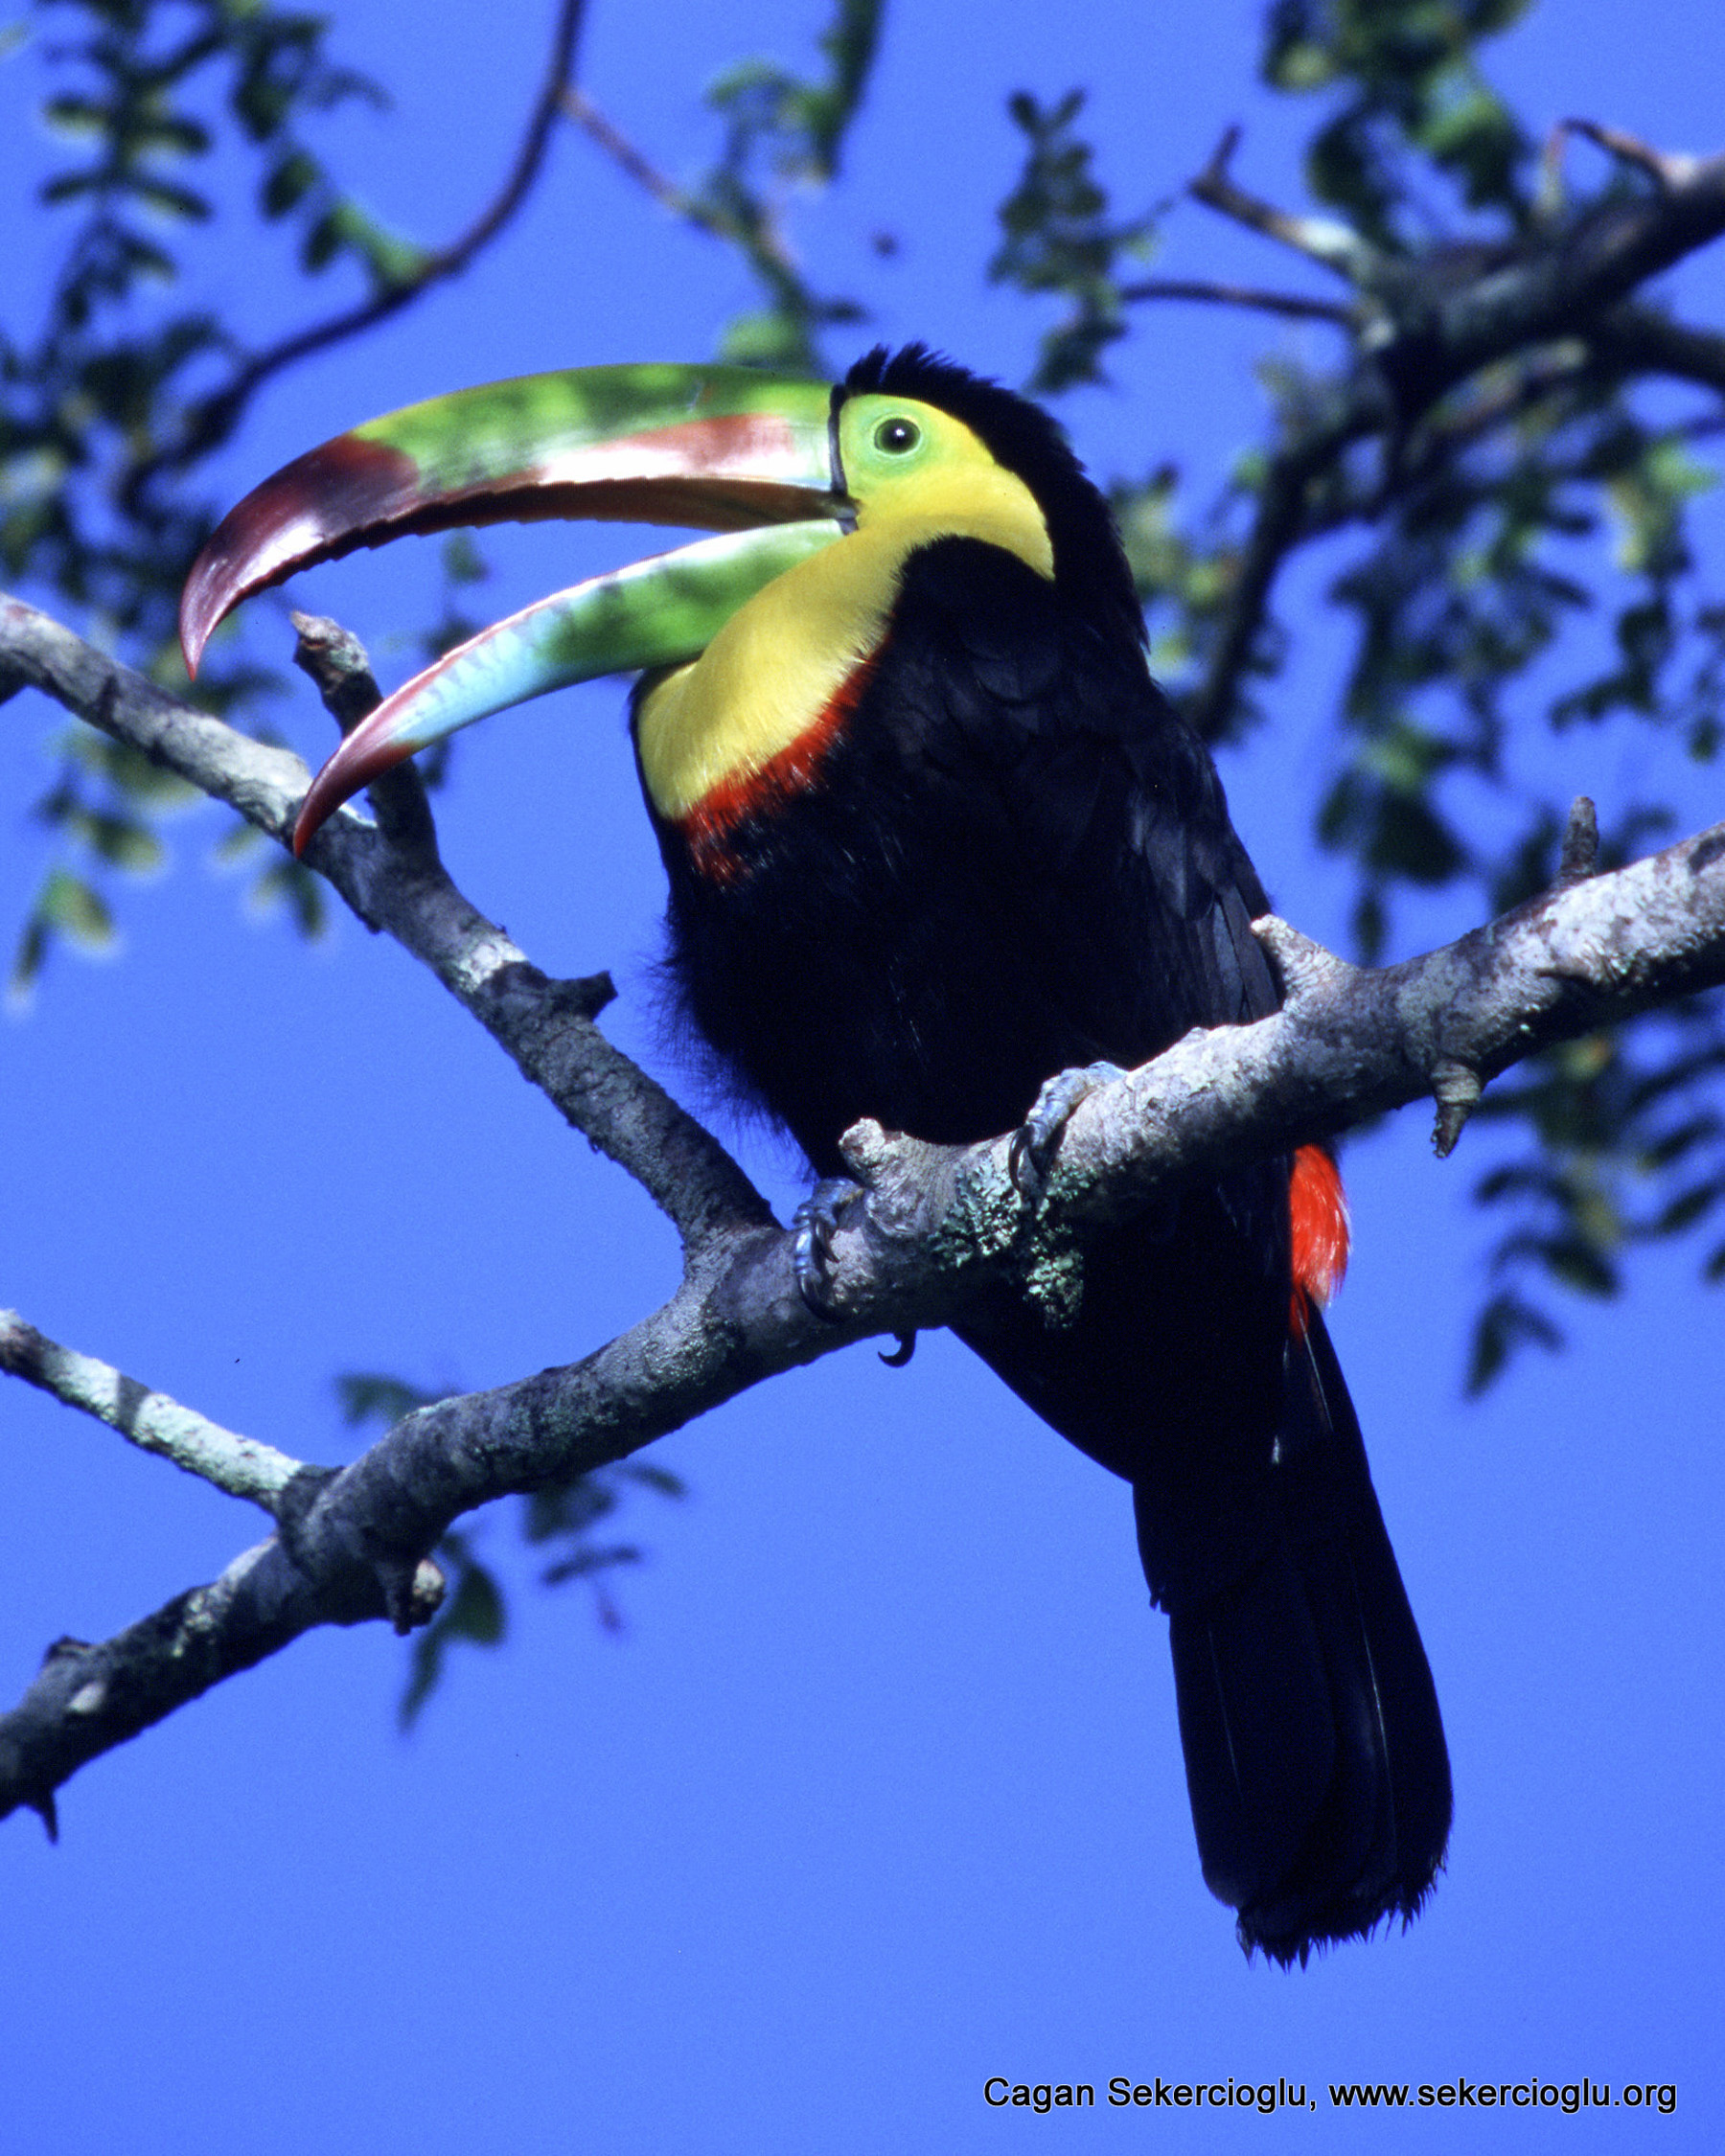 Rainbow-billed toucans like the one shown here normally are confined to lower elevations in Costa Rica, but global warming is allowing them to colonize mountain forests, where they compete with resident birds for food and nesting holes, and prey on their eggs and nestlings.